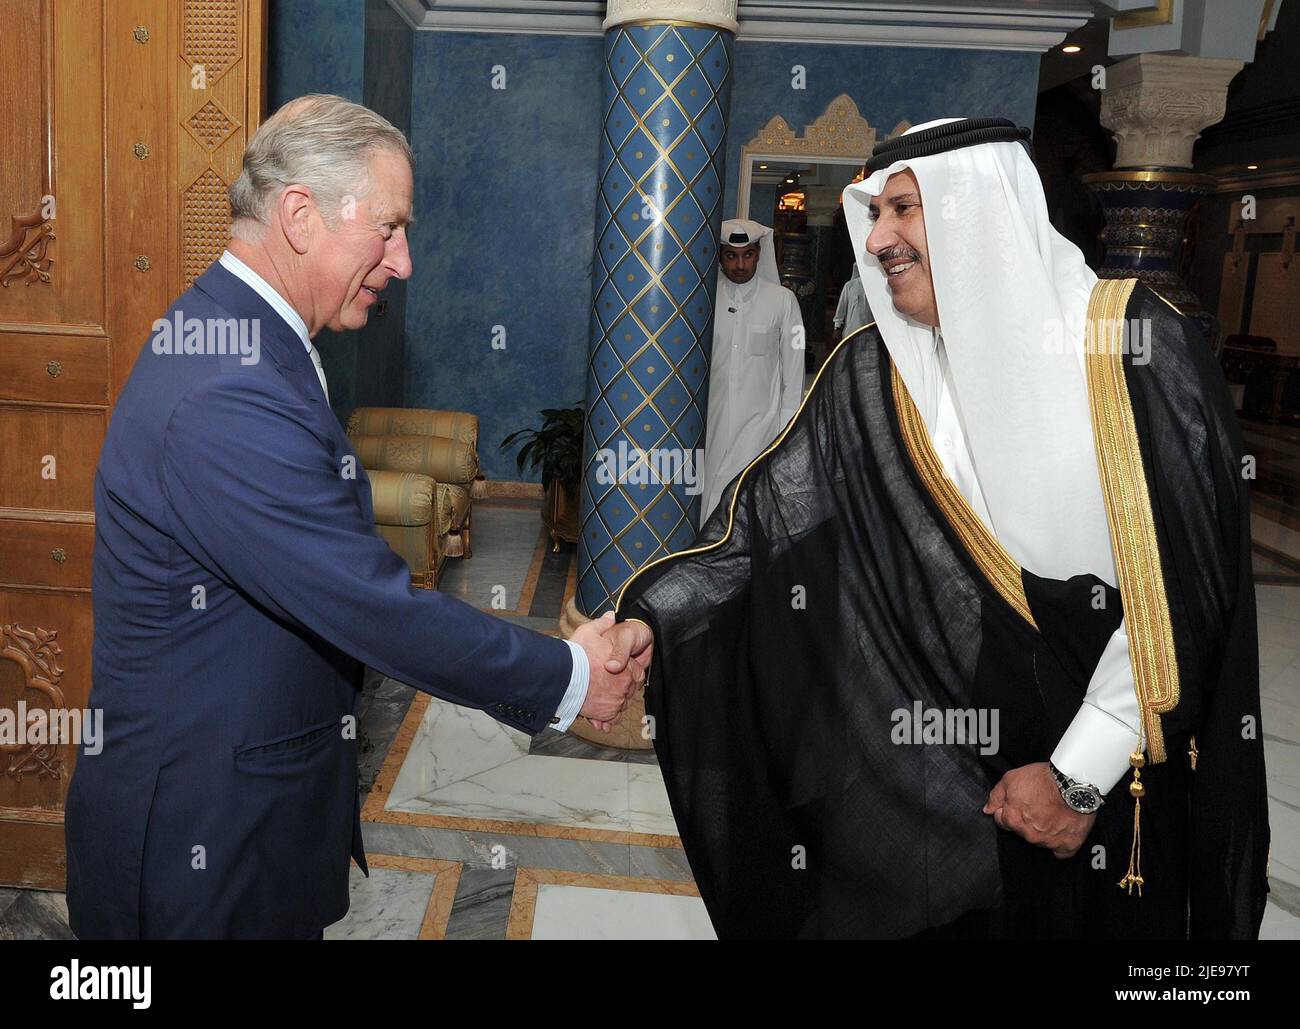 File photo dated 13/3/2013 of the Prince of Wales shakes hands with the Qatari Prime Minister Sheikh Hamad Bin Jassim al Thani, at his residence outside Doha, Qatar. The Prince accepted large cash donations totalling three million euros from the former Qatari prime minister, the Sunday Times has reported. The newspaper claimed the prince personally accepted the cash donations for his charity the Prince of Wales's Charitable Fund (PWCF) between 2011 and 2015 from Sheikh Hamad bin Jassim who was prime minister of Qatar between 2007 and 2013. Issue date: Sunday June 26, 2022. Stock Photo